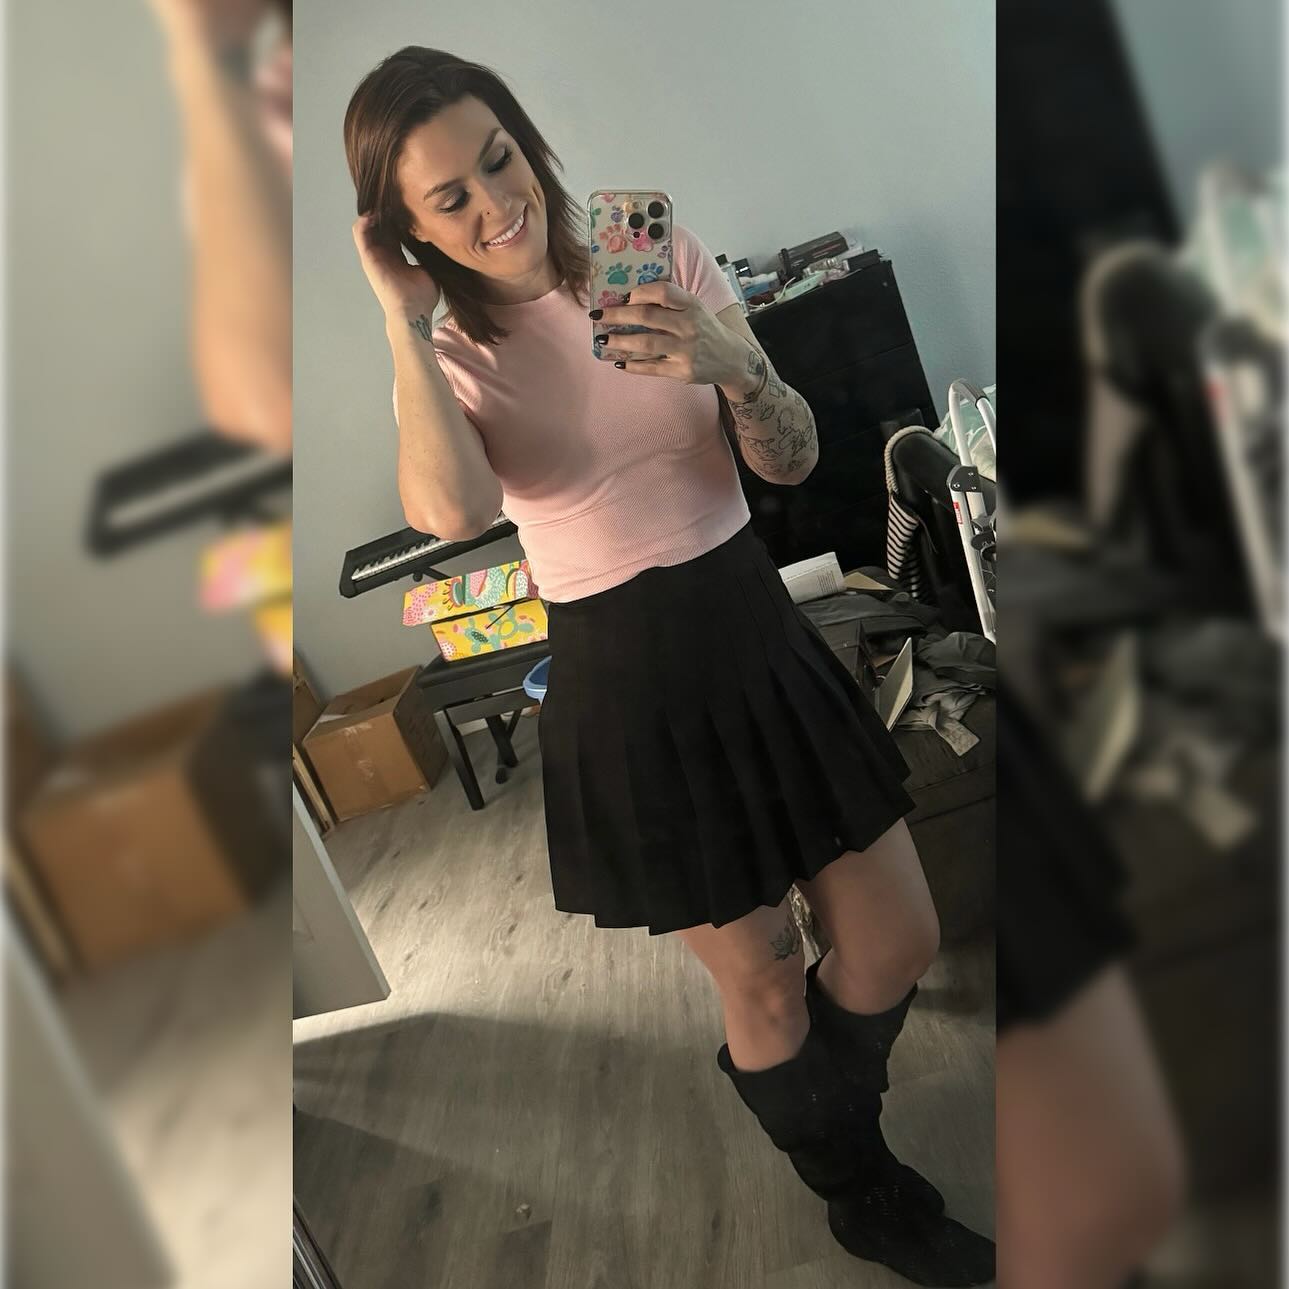 Happy Spring 🌸

#happy #smile #dimples #freckles #haircut #brunette #pink #skirt #ootd #boots #spring #weather #cool #love #arizona #tucson #homesweethome #tattoo #tattoosleeve #mirror #mirrorselfie